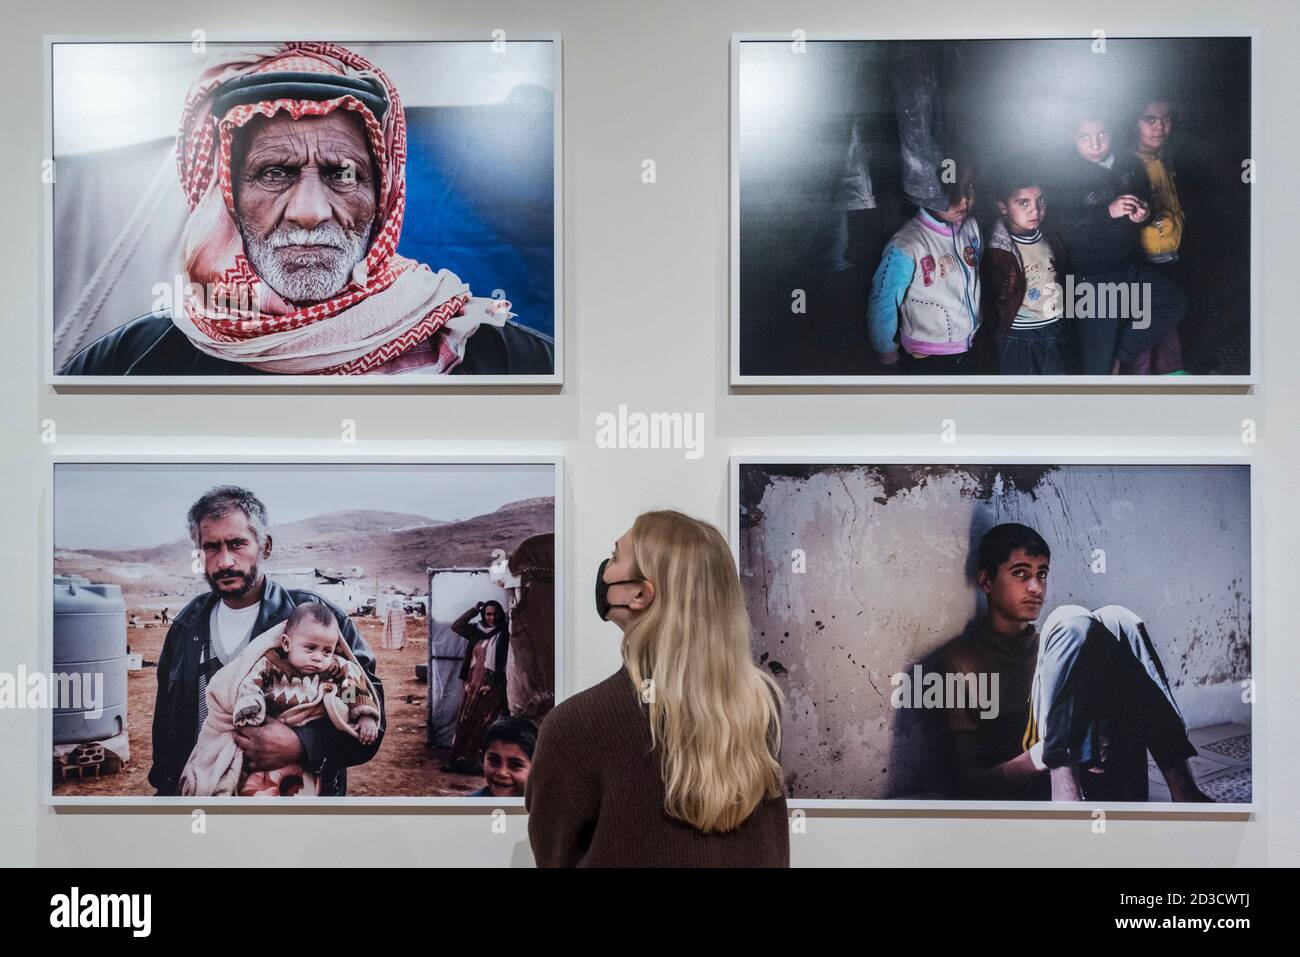 London, UK.  8 October 2020. A staff member views works by Leila Alaoui at the preview of Leila Alaoui: Rite of Passage at Somerset House. The exhibition is the first major UK retrospective of works by the celebrated late French-Moroccan photographer, video artist and activist who was killed aged 33 after suffering injuries during a terrorist attack in Burkina Faso whilst on a photographic assignment for Amnesty International.  The exhibition runs 11 October 2020 – 28 February 2021.  Credit: Stephen Chung / Alamy Live News Stock Photo